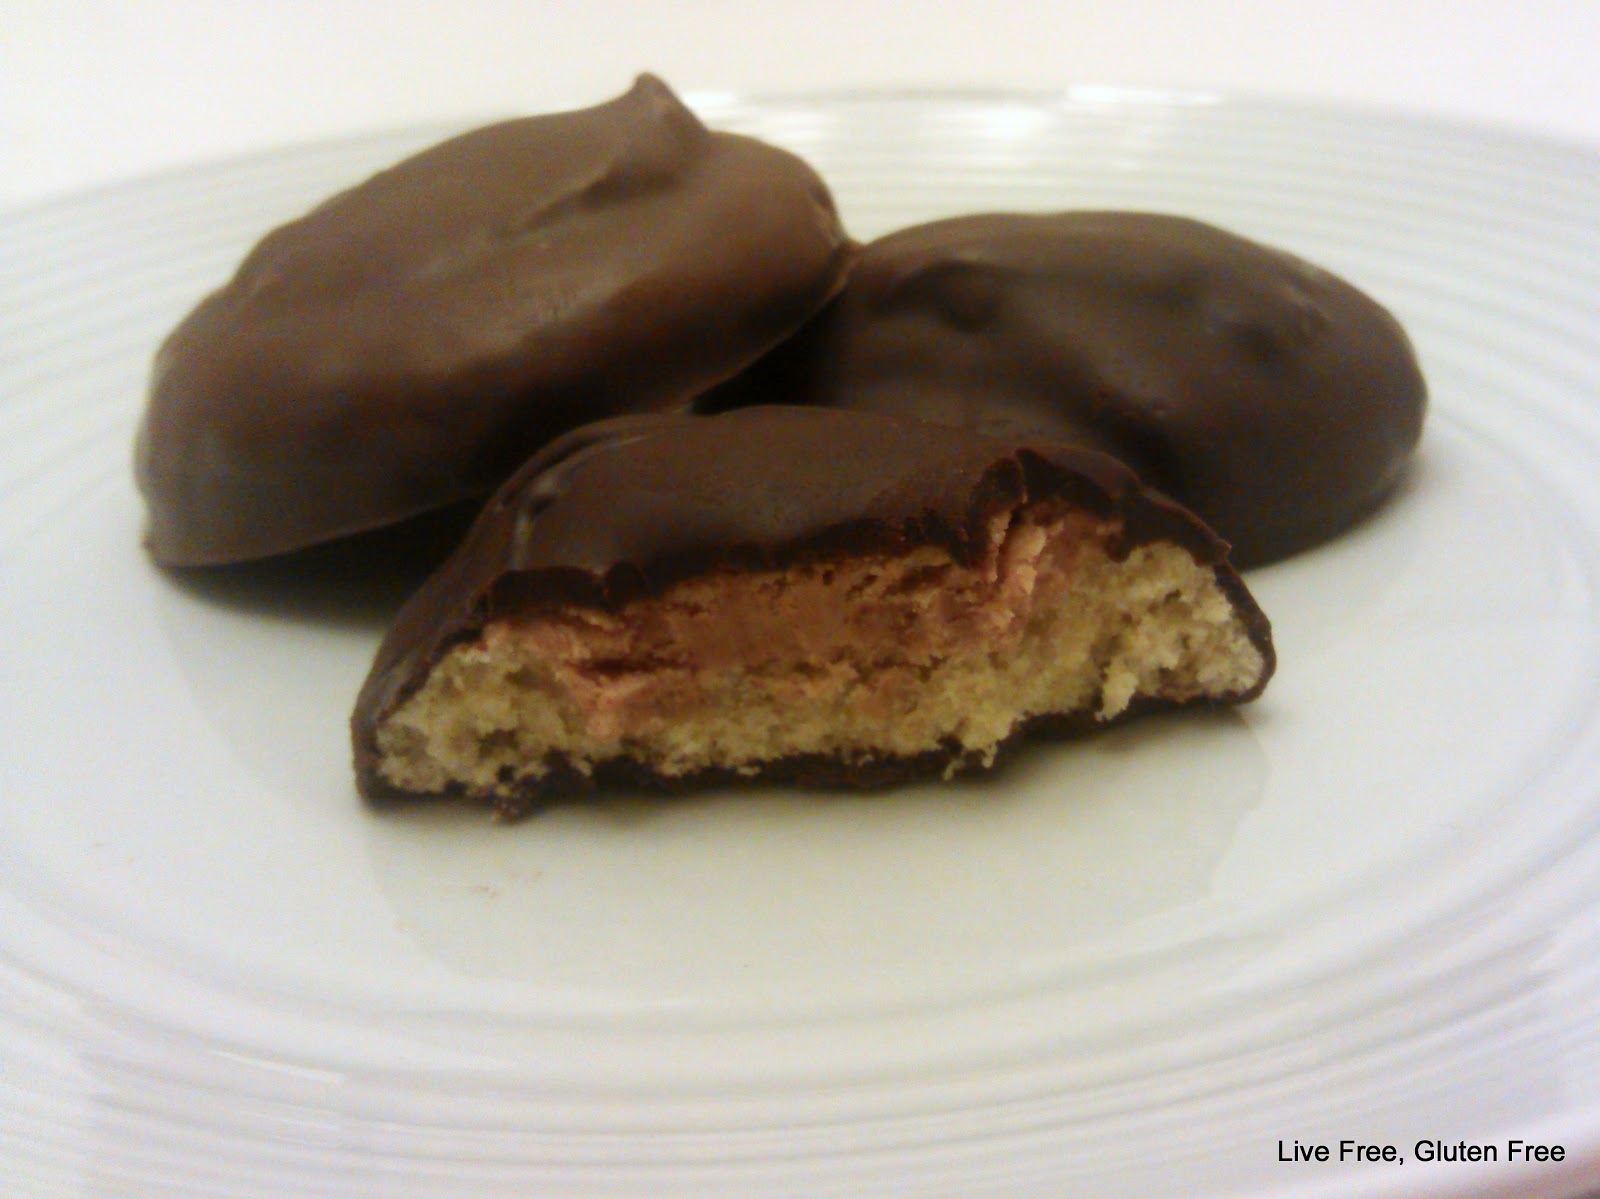 Live Free, Gluten Free: Girl Scout Cookies: Tagalongs and Trefoils